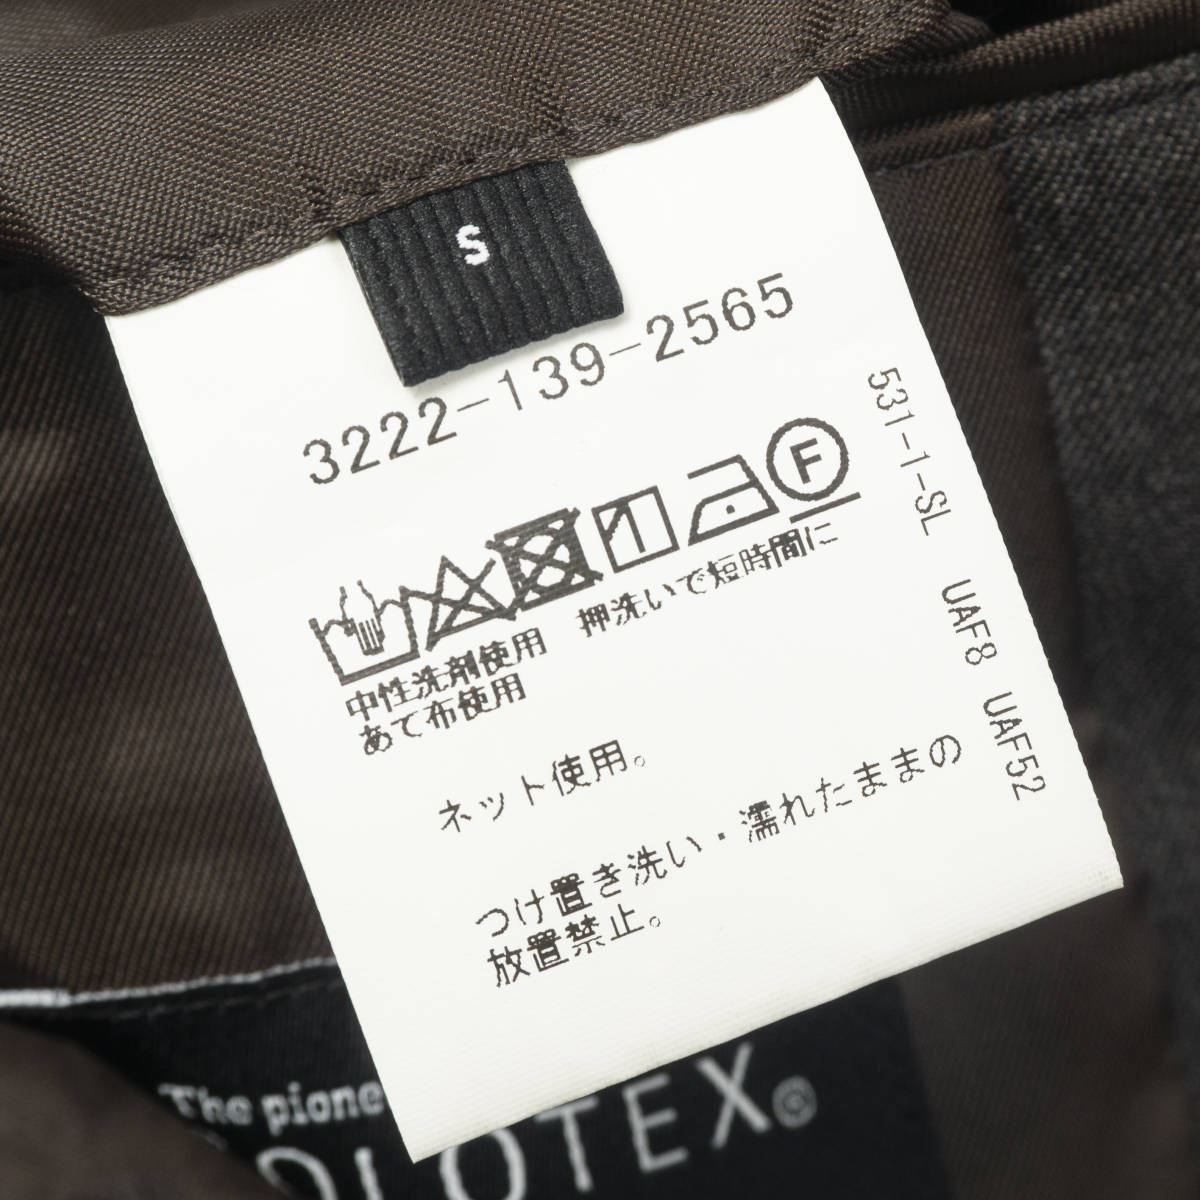 SOLOTEX material [ Arrows GLR] Anne navy blue jacket S size Brown spring summer tailored lining none men's control 144